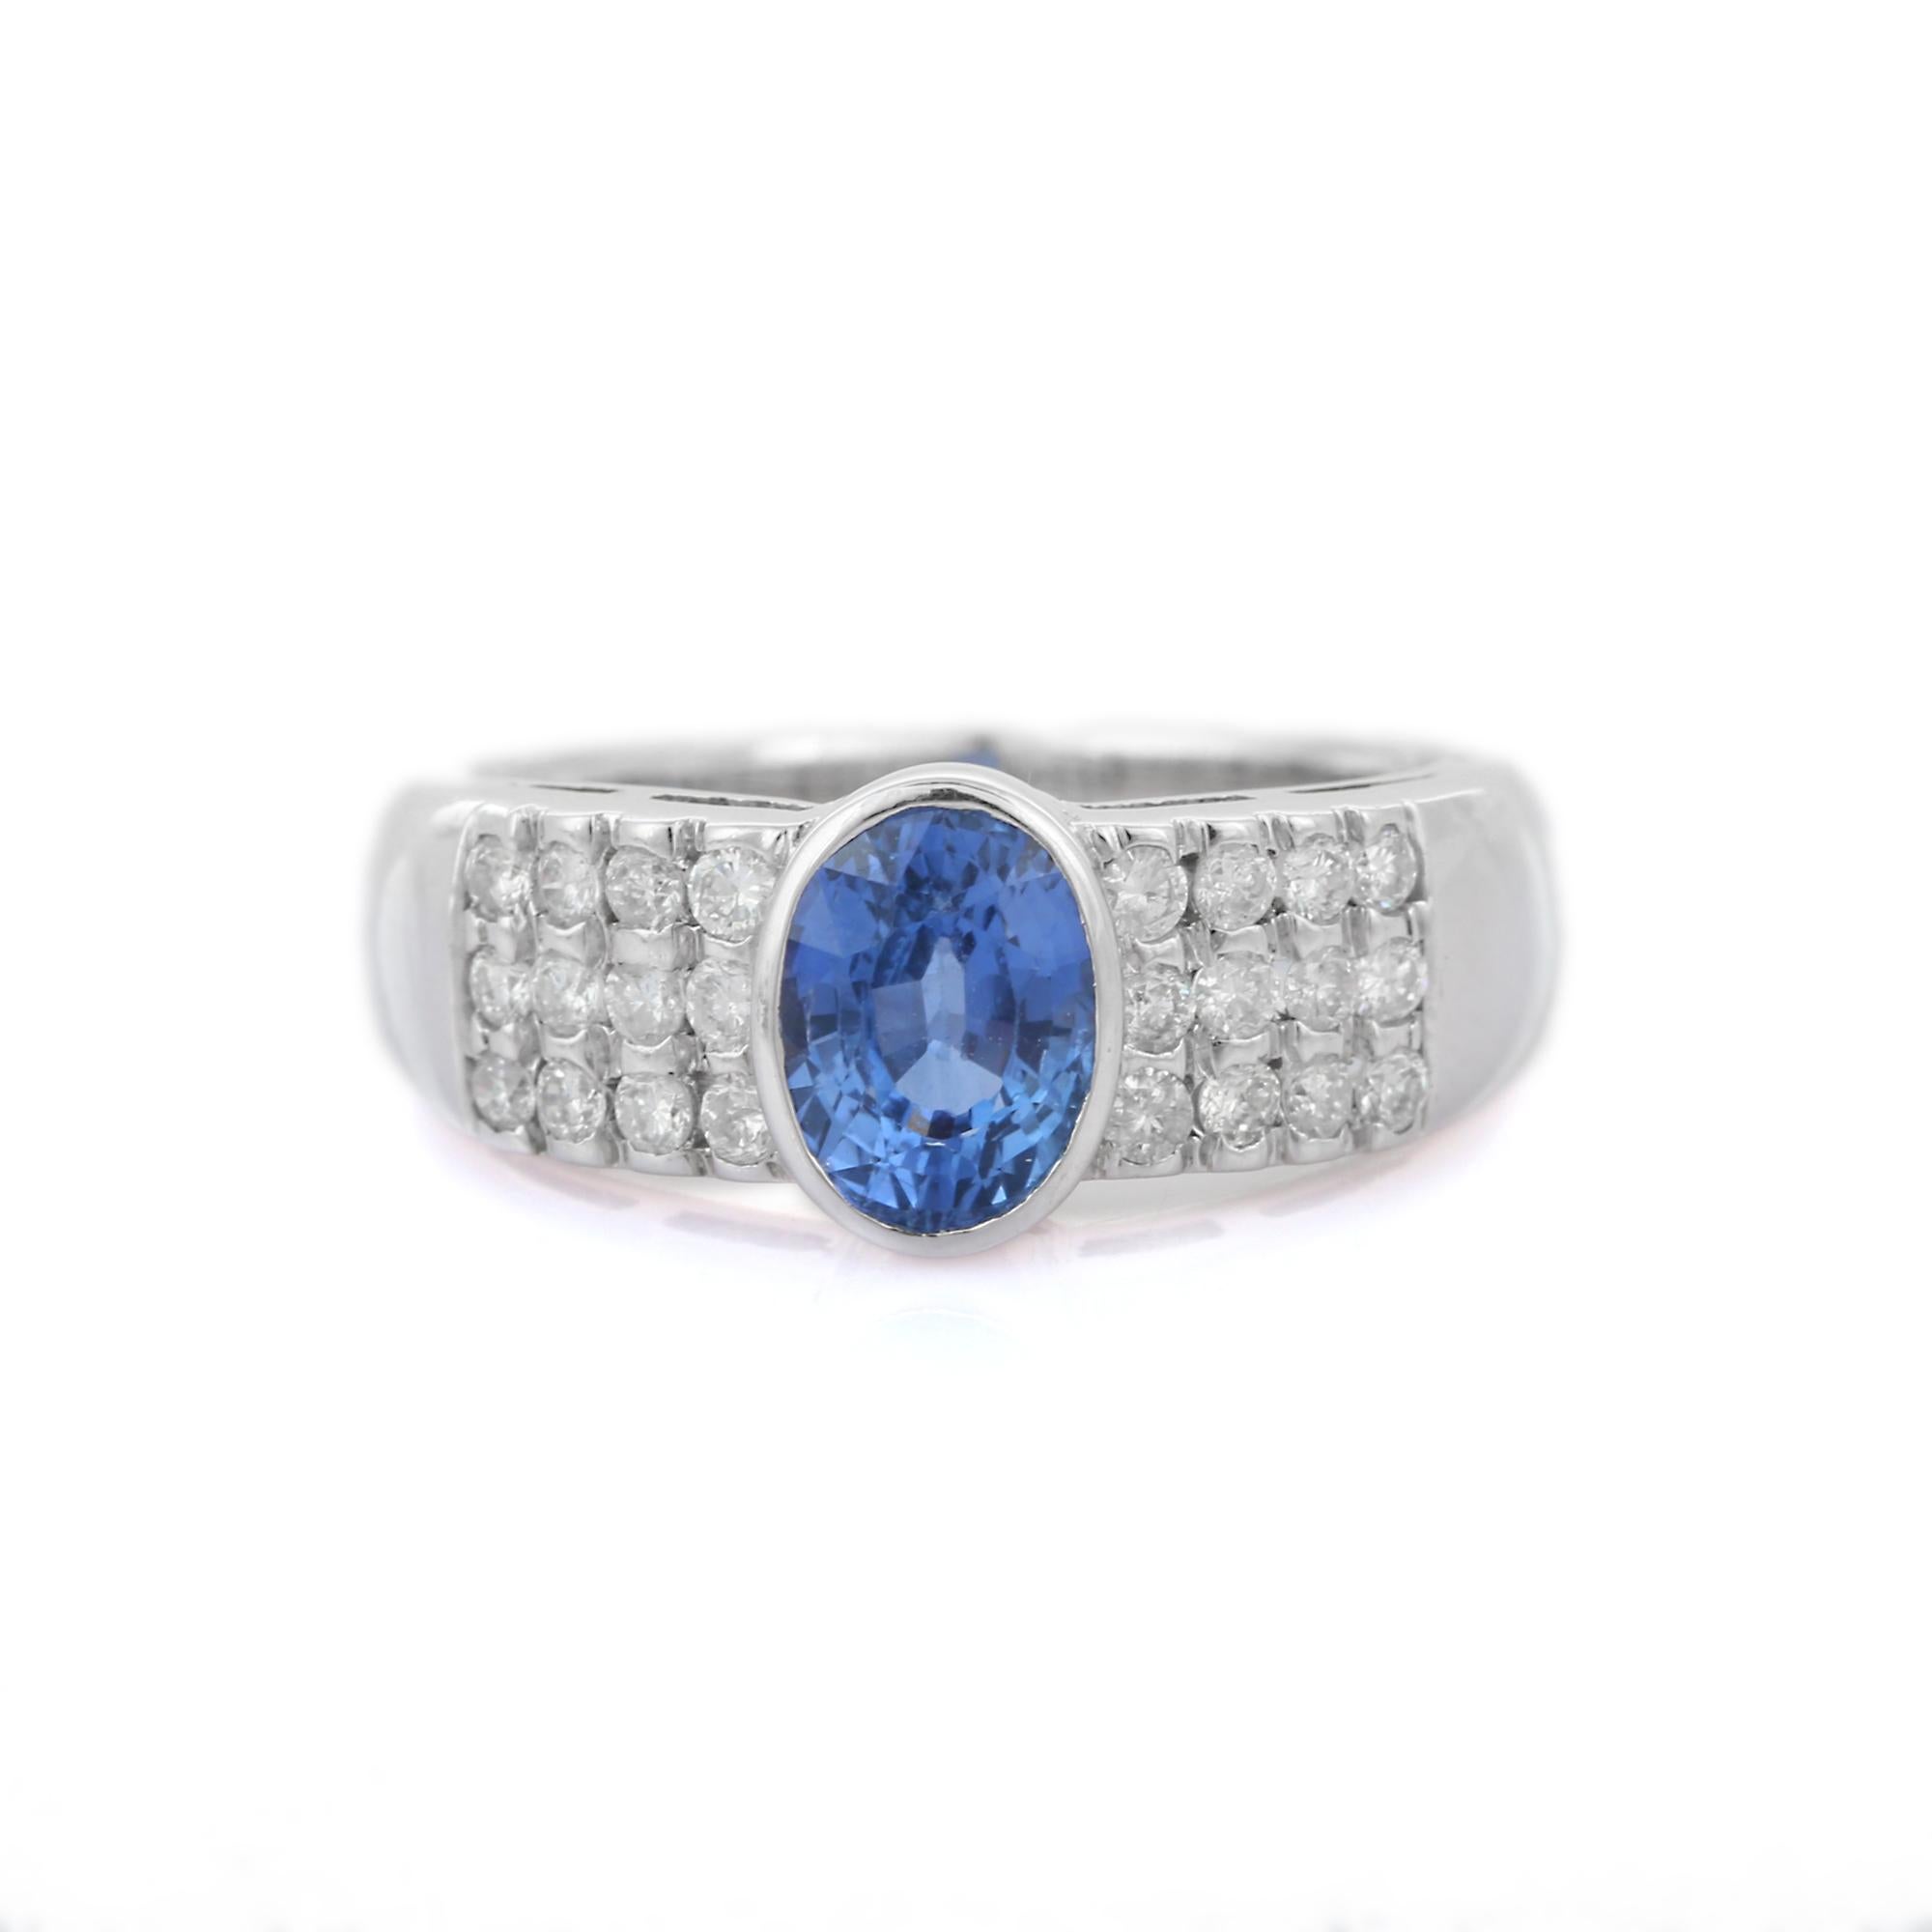 For Sale:  18 Karat White Gold 2.05 ct Oval Blue Sapphire and Diamond Engagement Ring  2